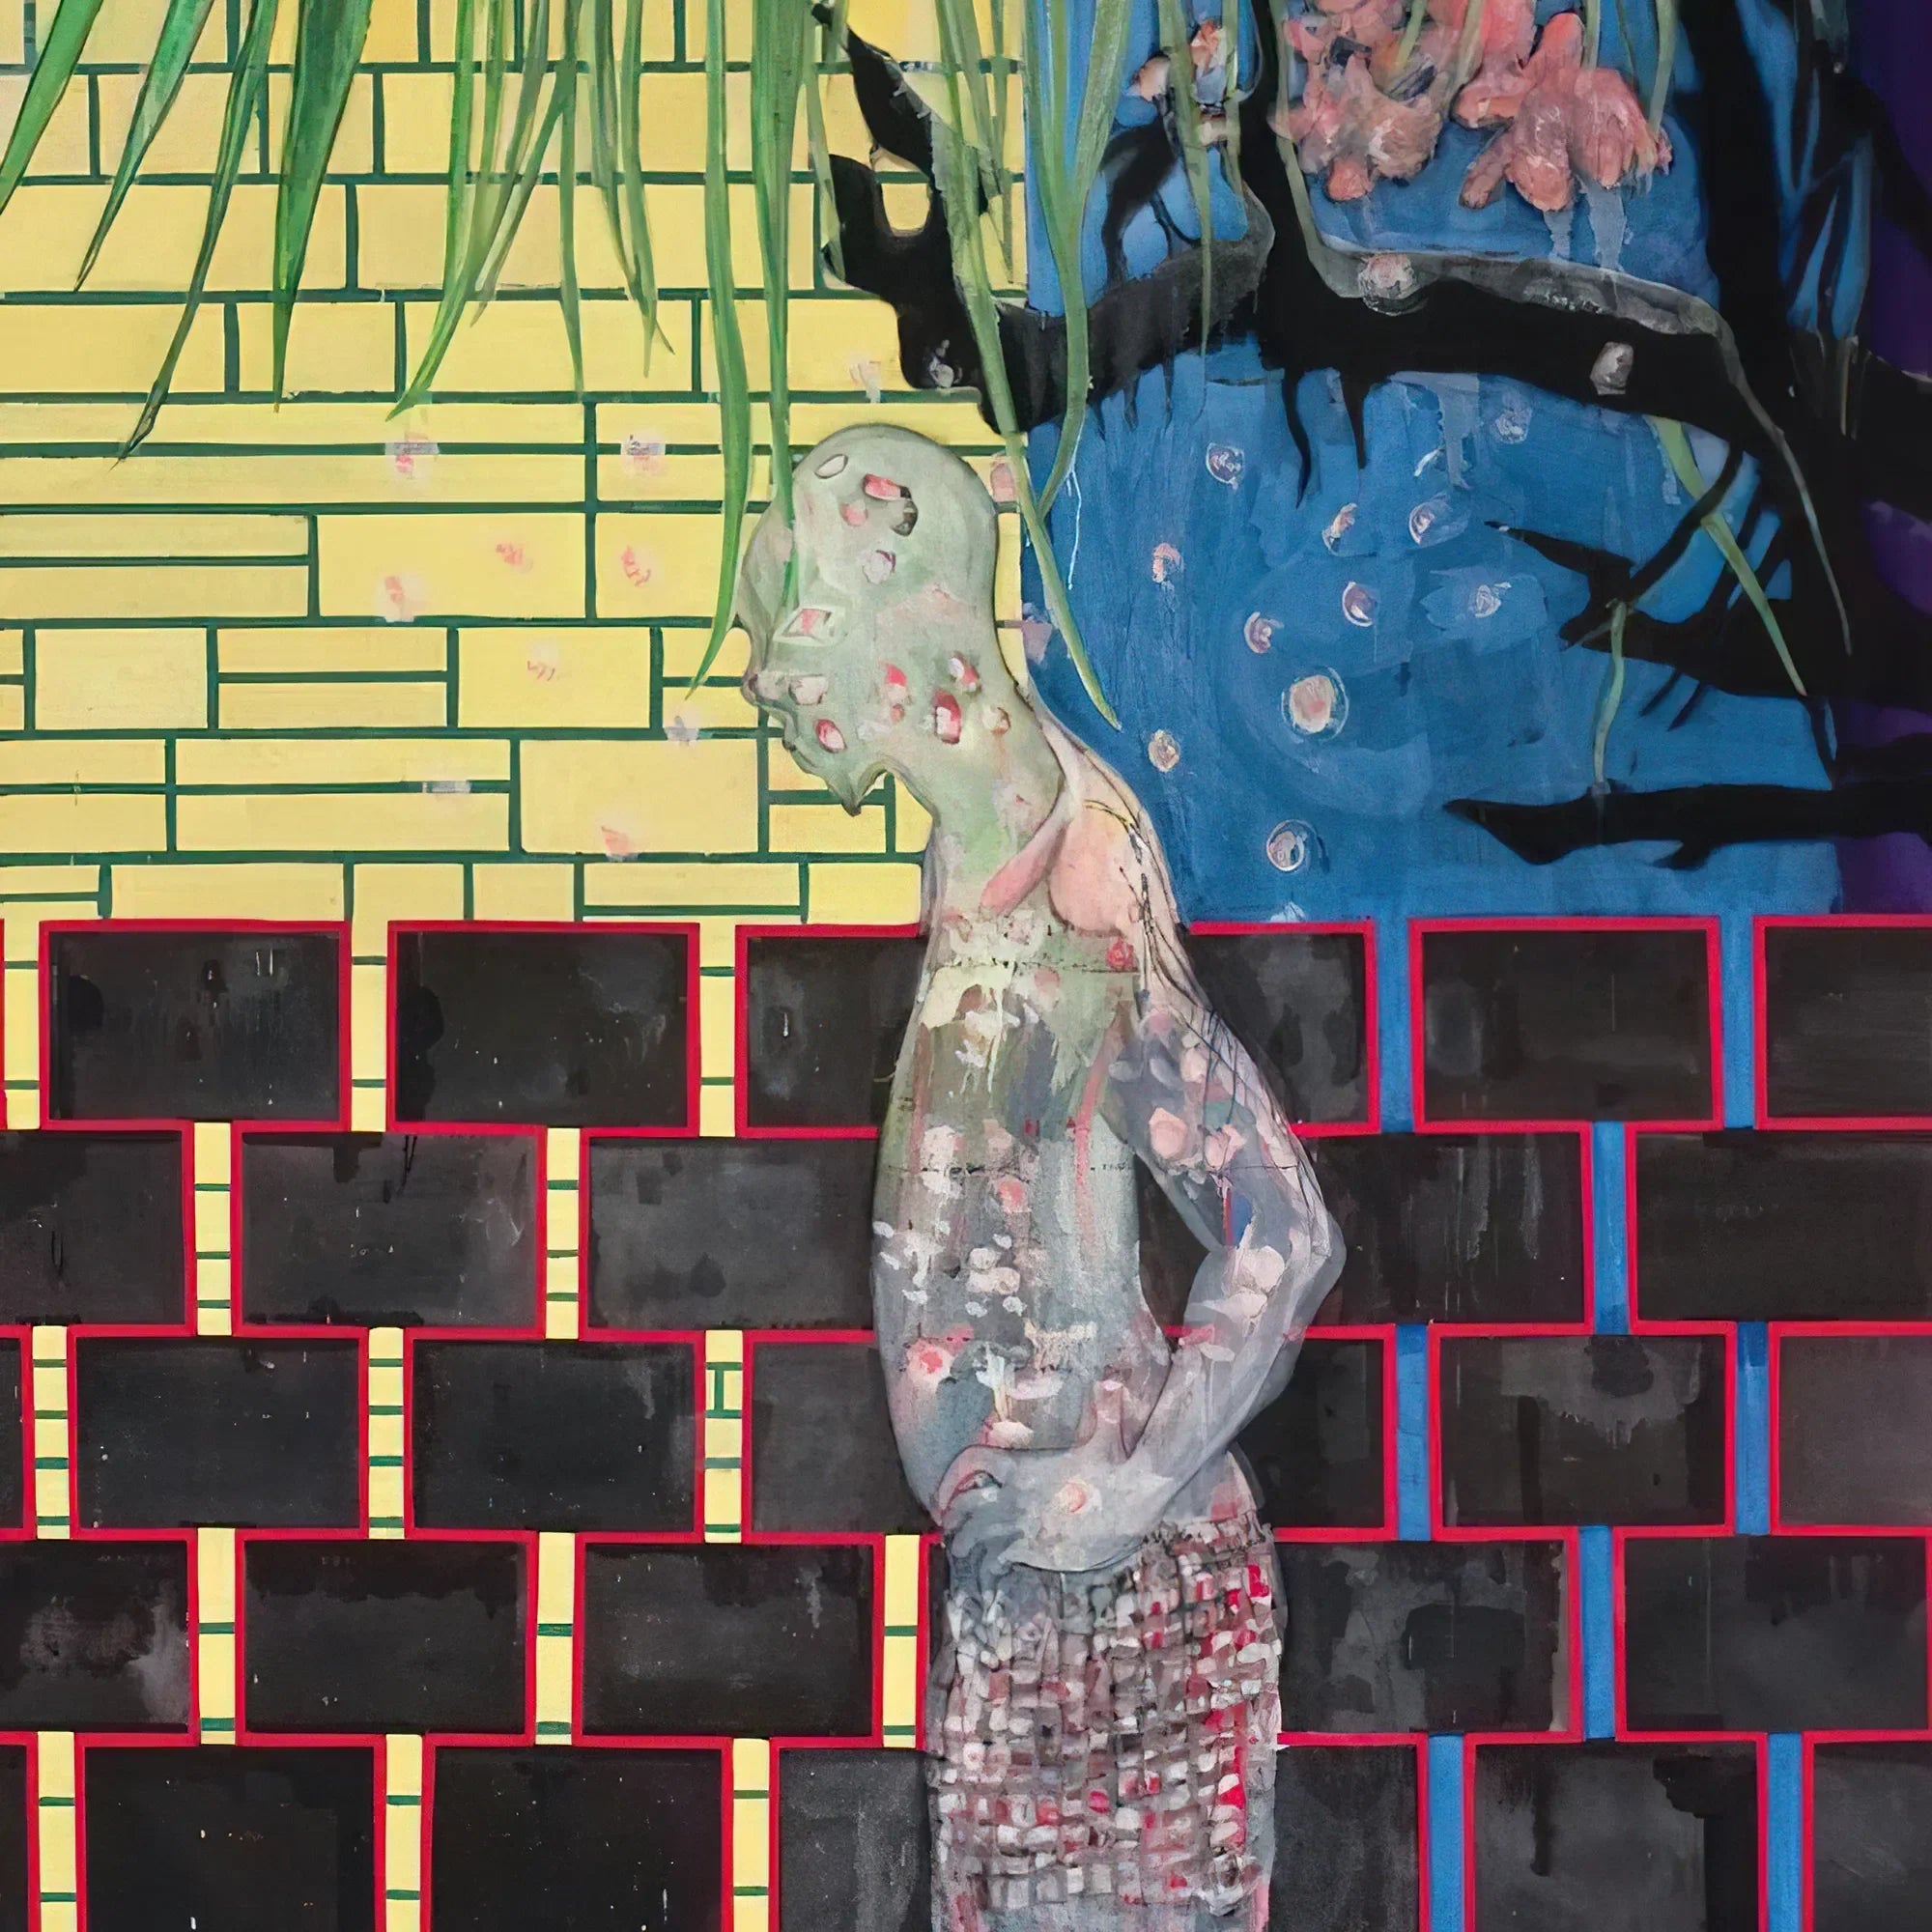 Peter Doig’s Dreamscapes from Scotland to Trinidad